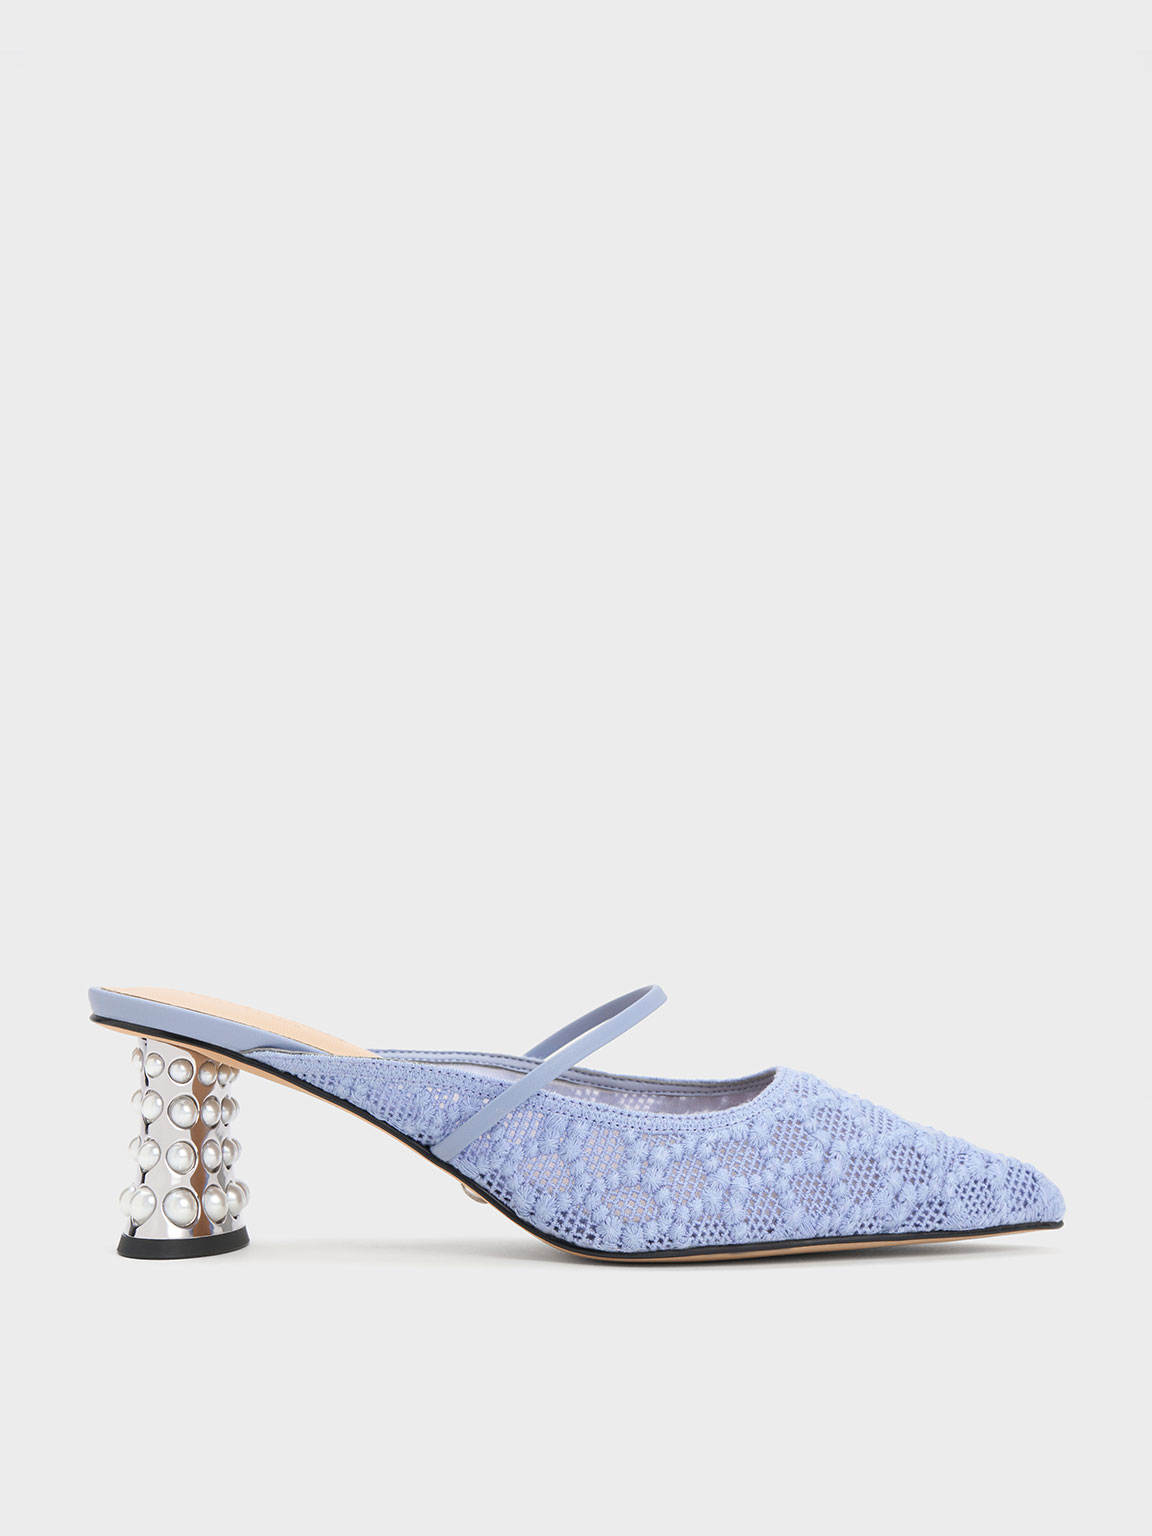 Charles & Keith Crochet & Leather Beaded Heel Mules In Blue